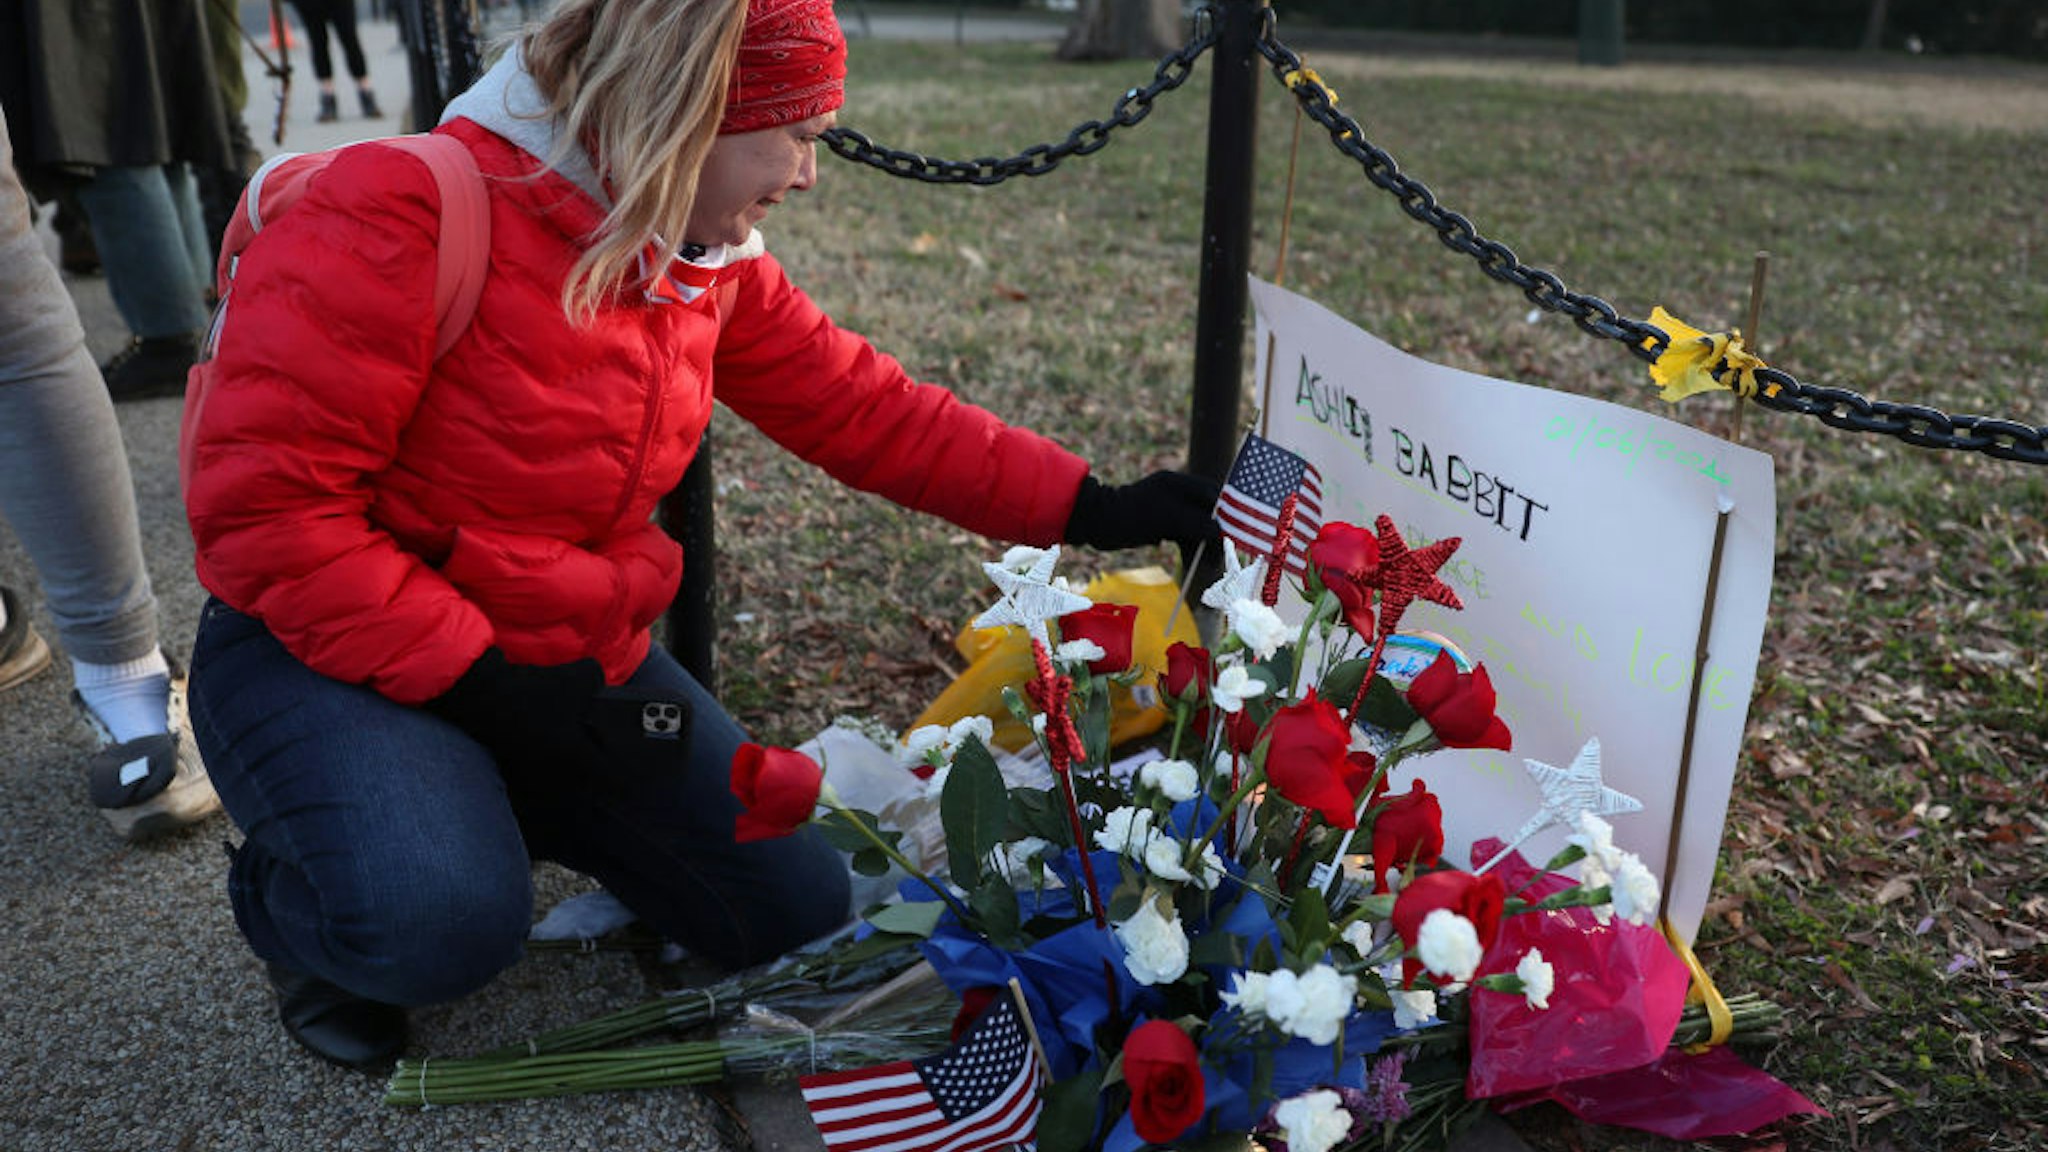 Melody Black, from Minnesota, becomes emotional as she visits a memorial setup near the U.S. Capitol Building for Ashli Babbitt who was killed in the building after a pro-Trump mob broke in on January 07, 2021 in Washington, DC.